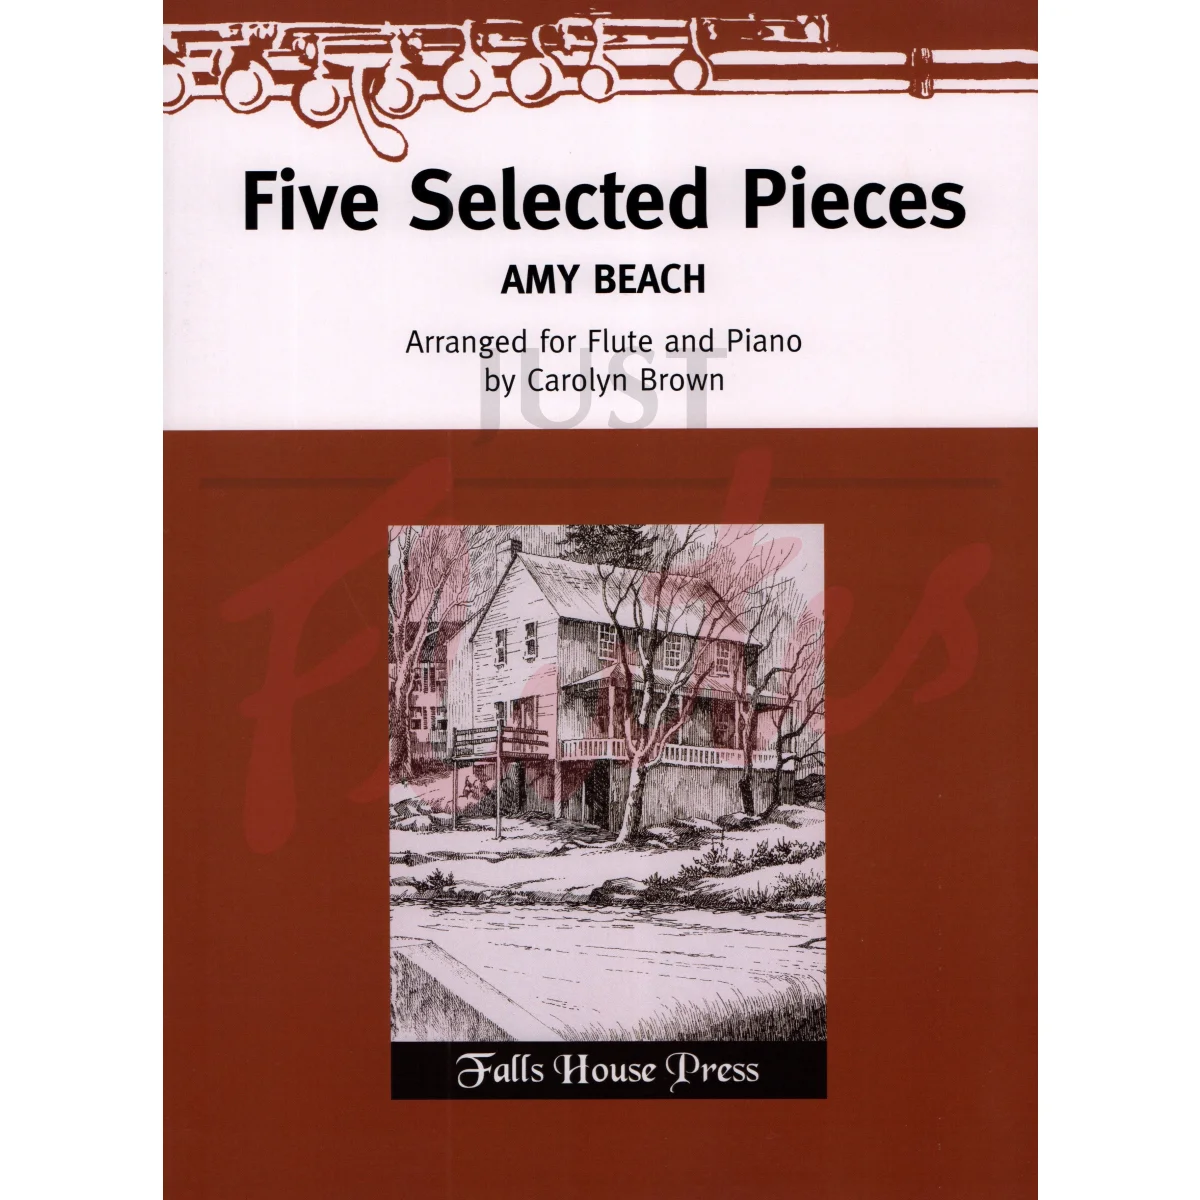 Five Selected Pieces for Flute and Piano